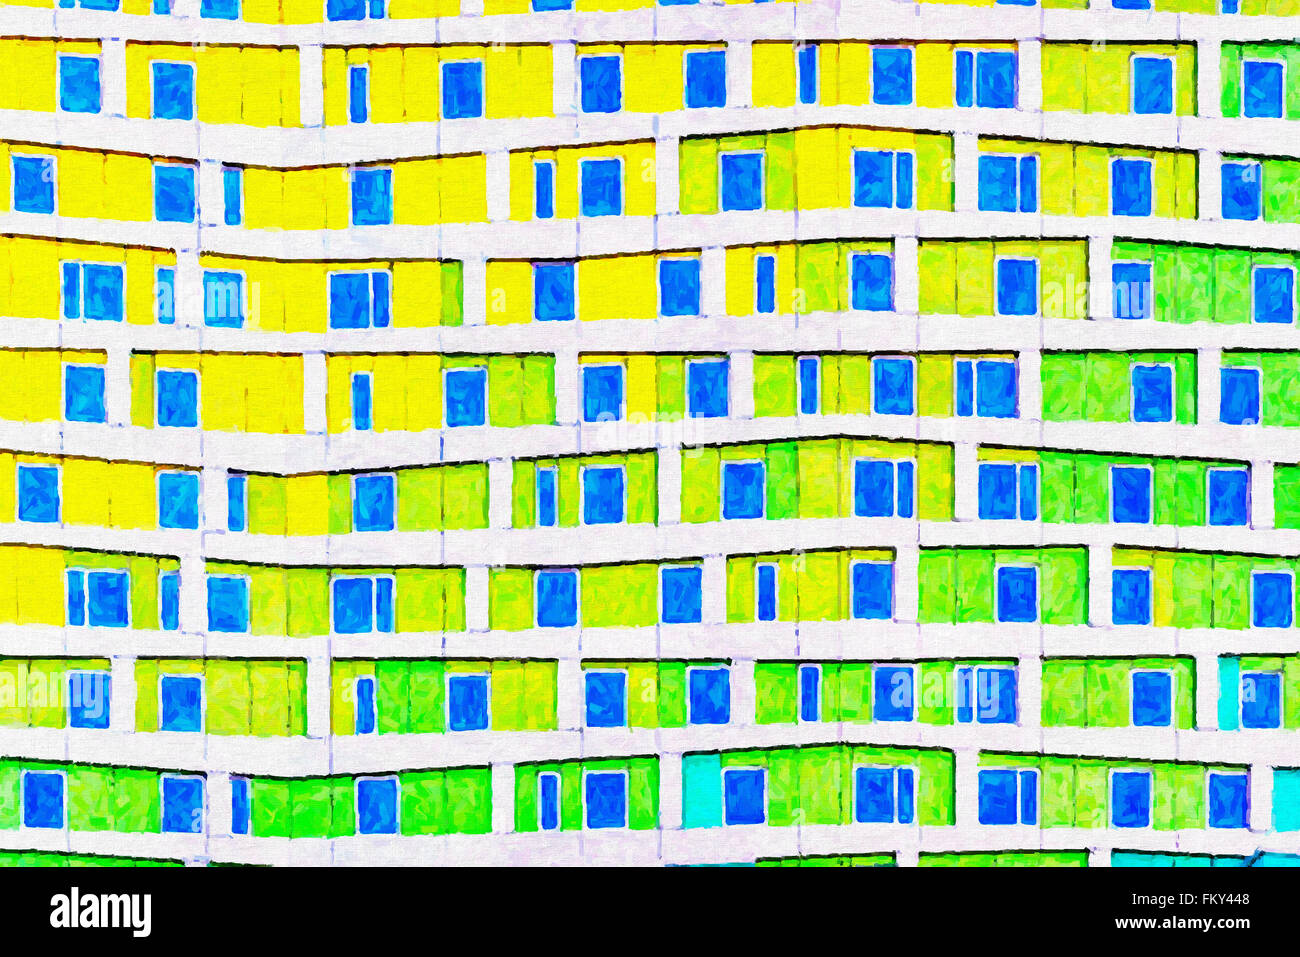 A digital painting of the front facade of a modern office block with a very abstract artistic look to it. Stock Photo